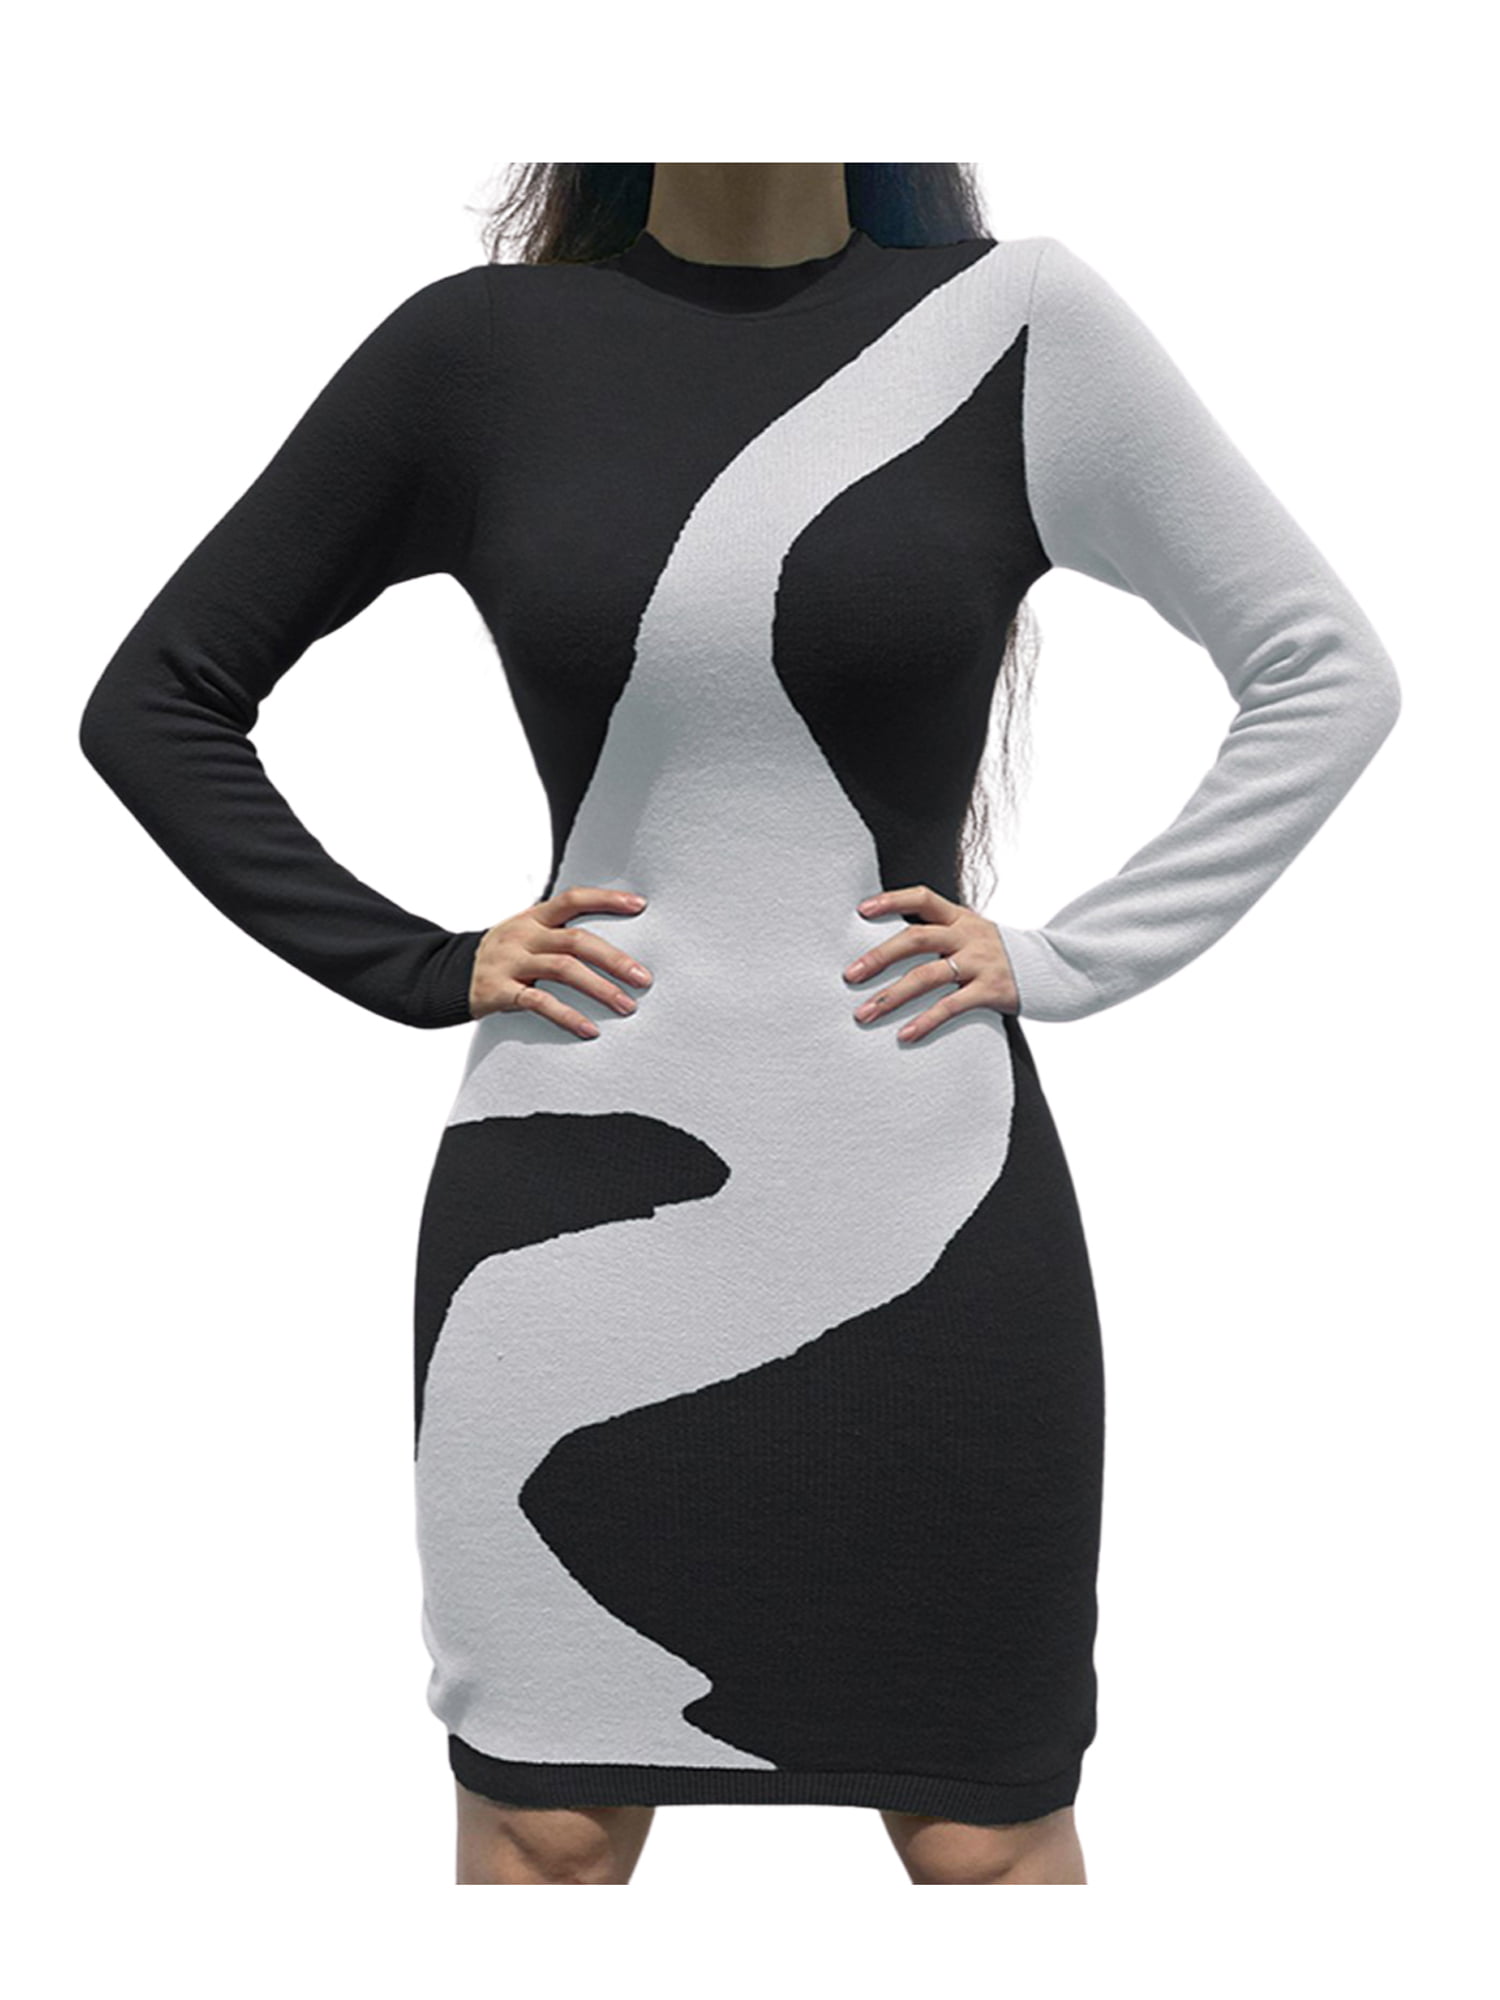 Details about  / Custom 1:6th Black And White Striped Sweater Dress For 12/" Female Body Doll